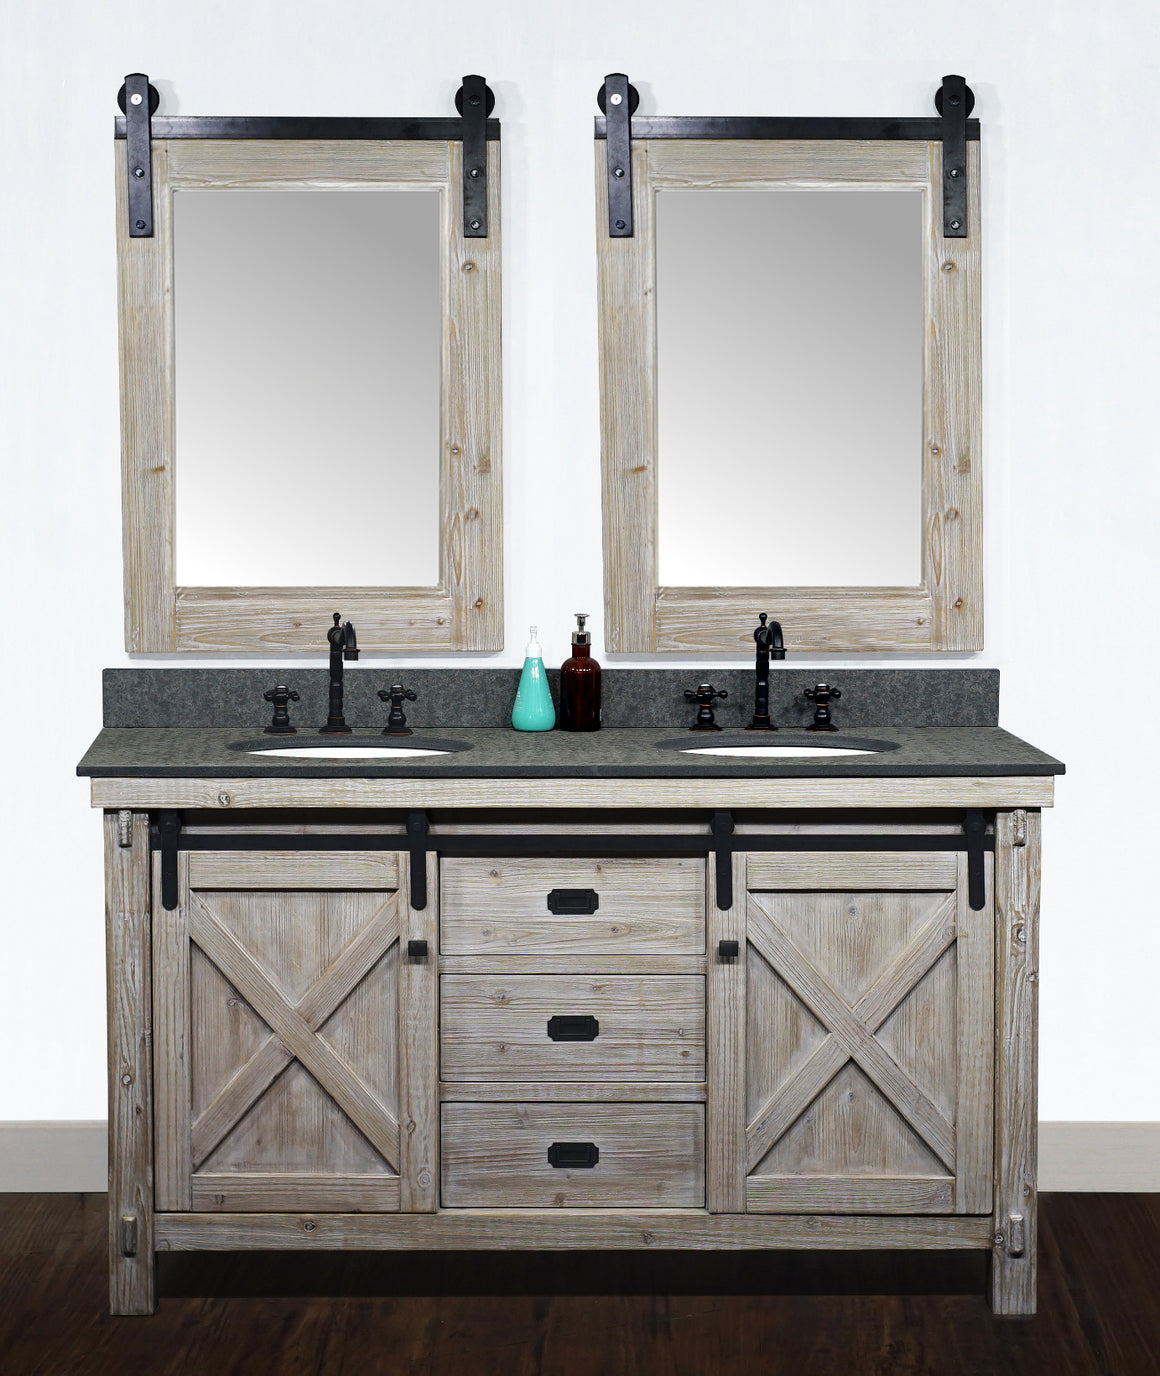 60"RUSTIC SOLID FIR BARN DOOR STYLE DOUBLE SINKS VANITY WITH RUSTIC STYLE POLISHED TEXTURED SURFACE GRANITE TOP IN MATTE GREY-NO FAUCET